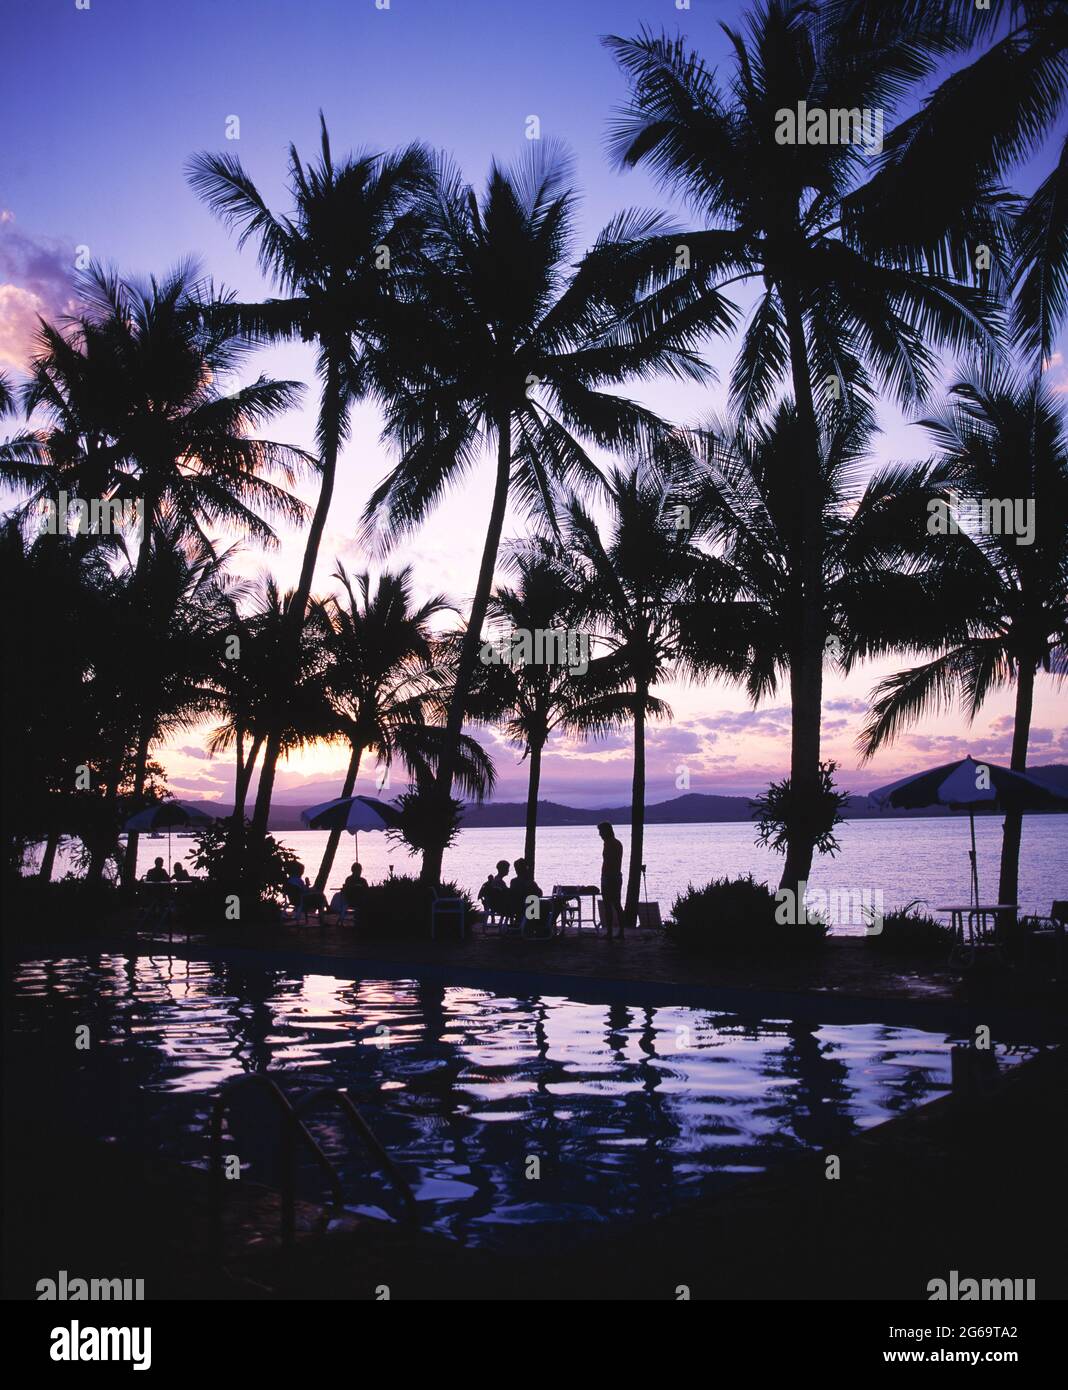 Australia. Queensland. Dunk Island. People by hotel pool with palm trees at sunset. Stock Photo